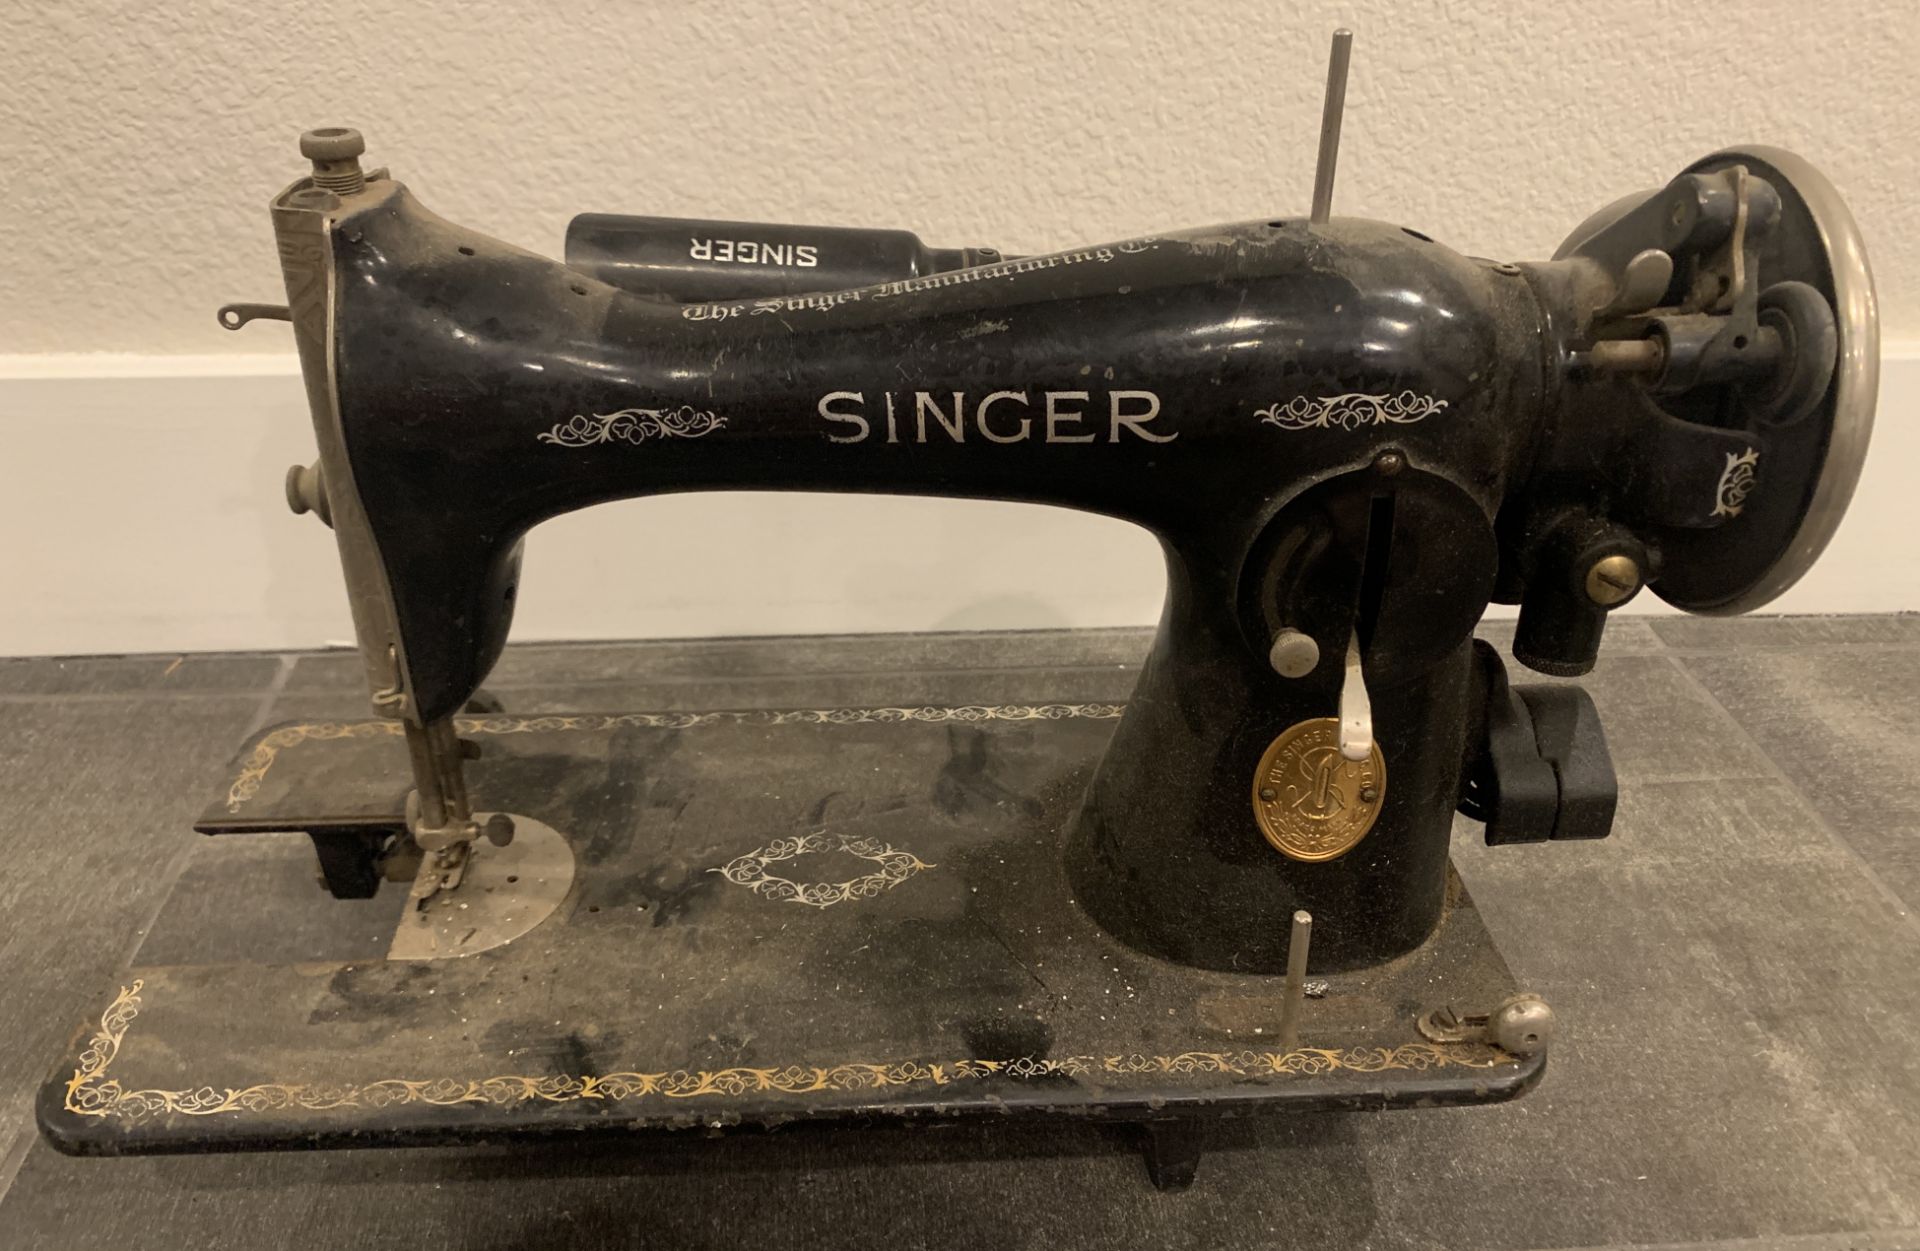 ANTIQUE SINGER SEWING MACHINE BLACK AND GOLD, VERY RARE